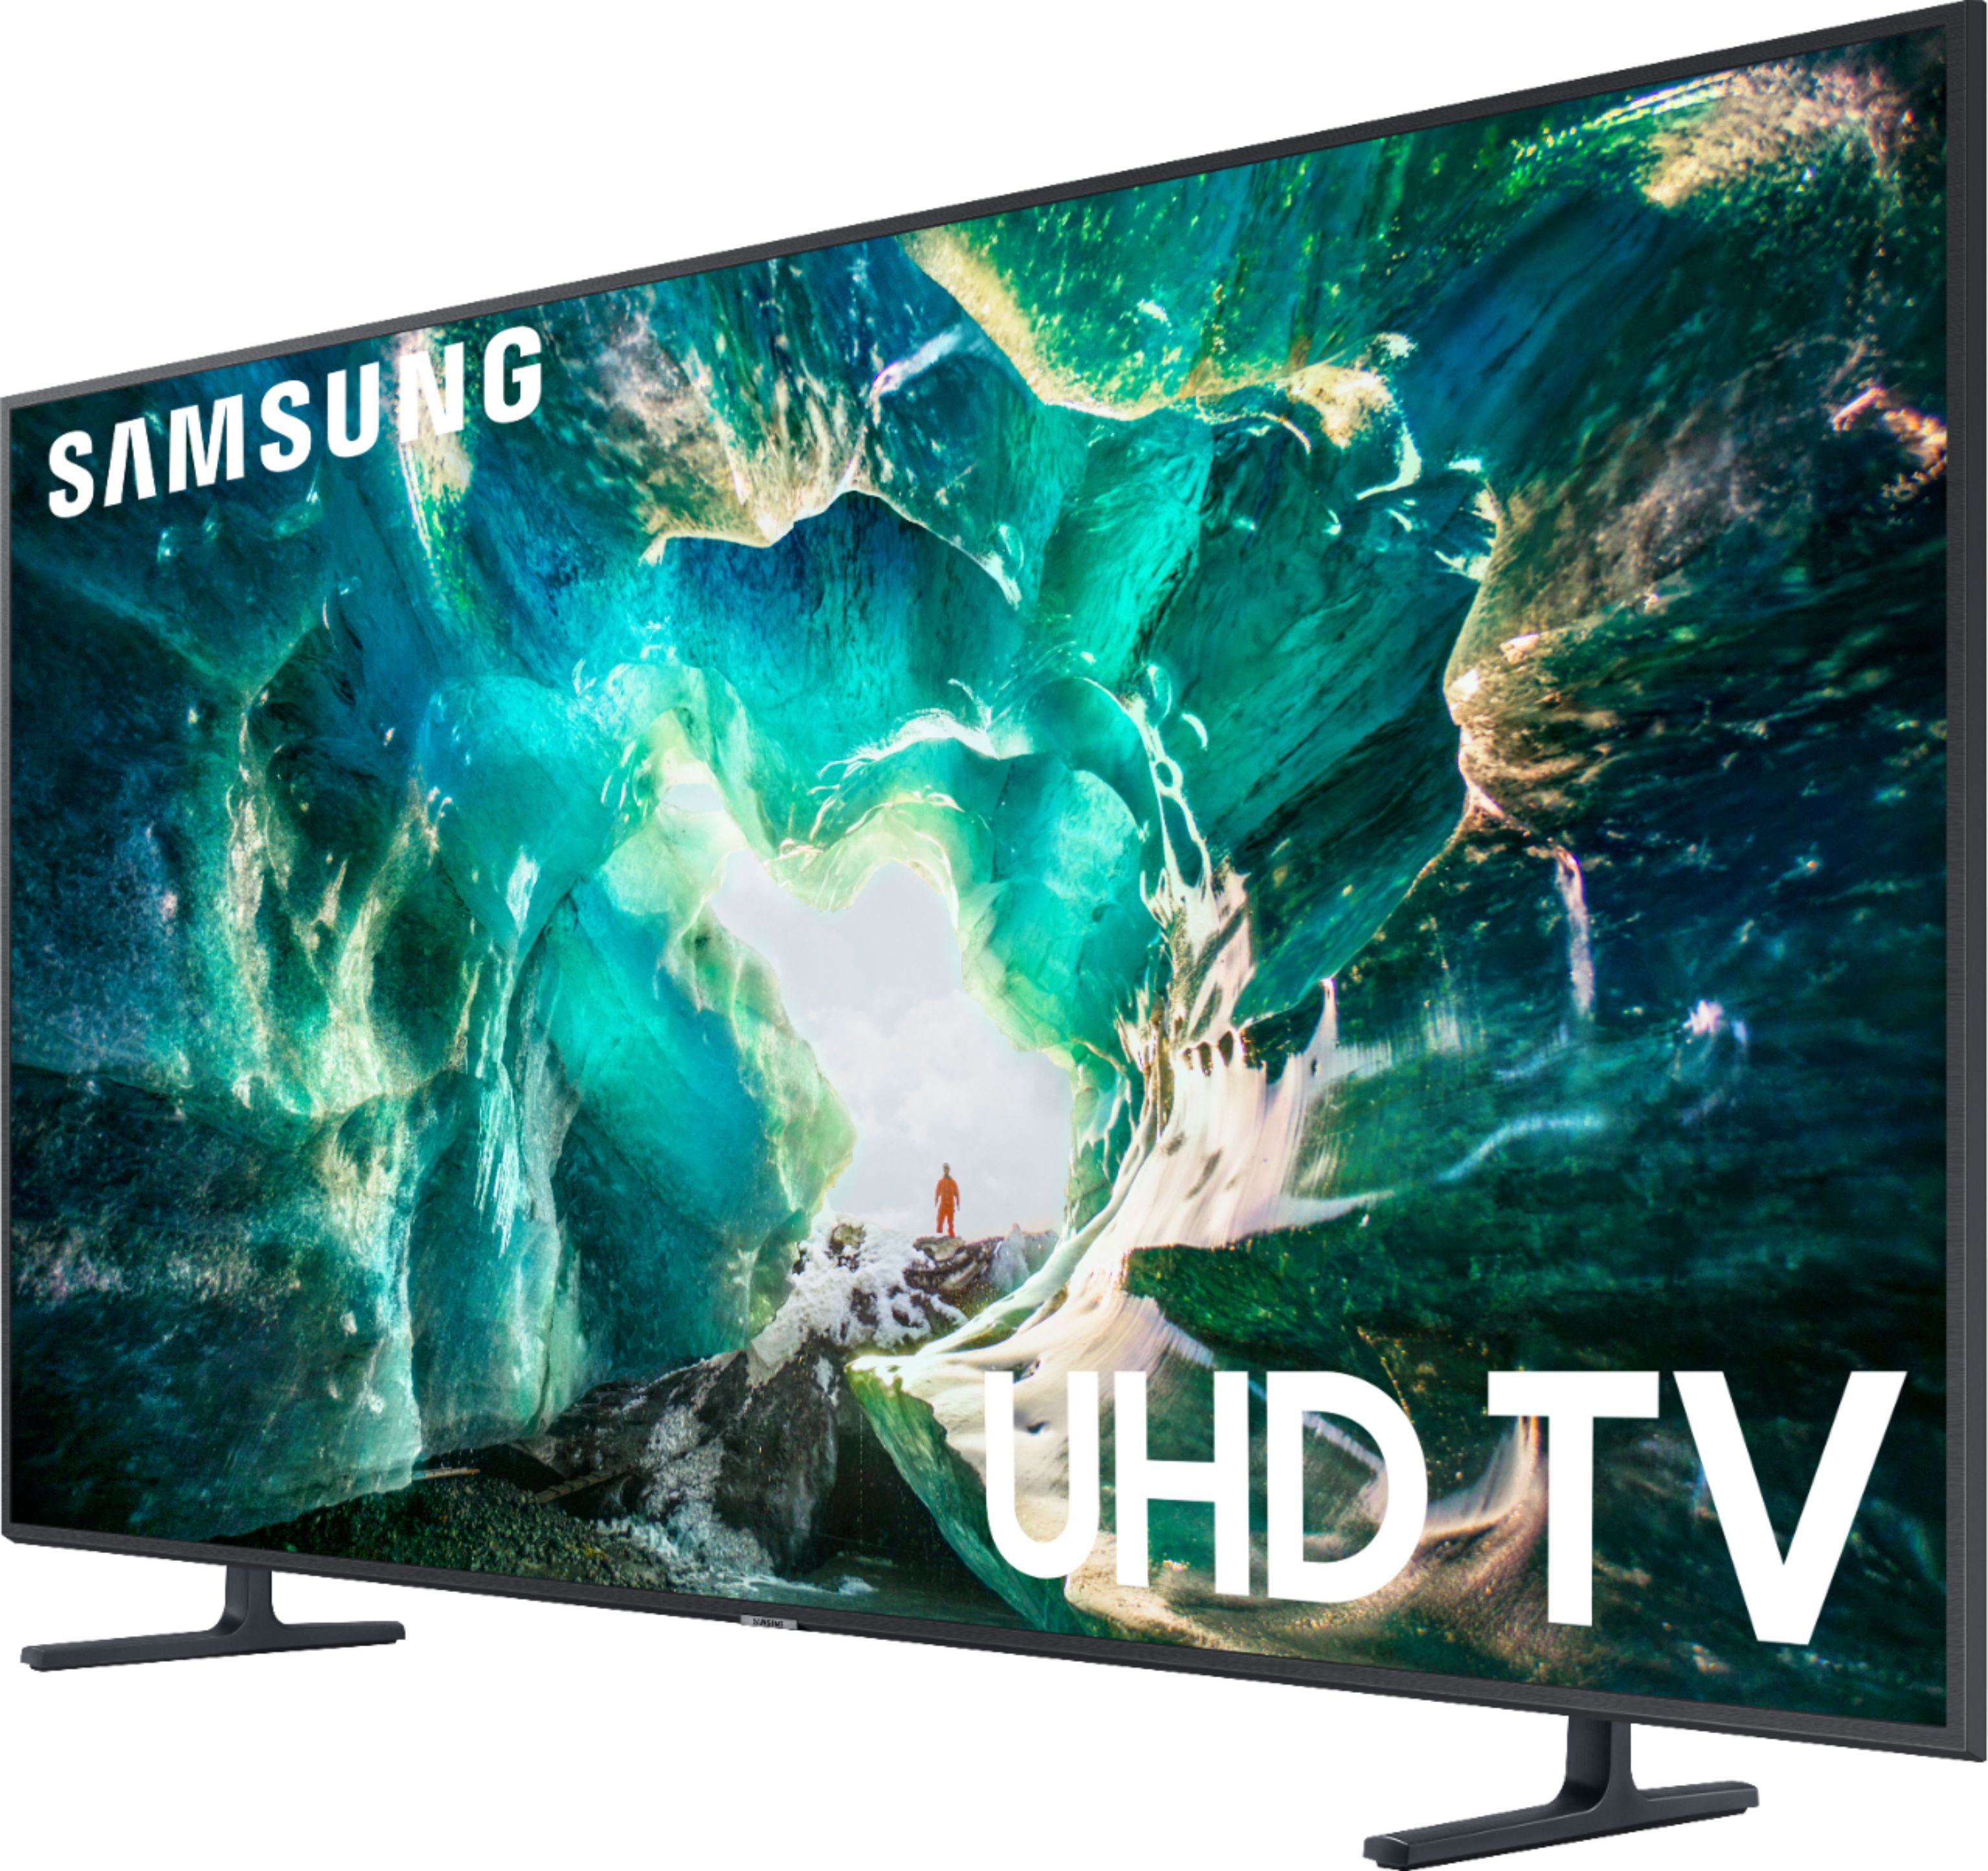 Left View: Samsung - 55" Class - 8 Series - 4K UHD TV - Smart - LED - with HDR